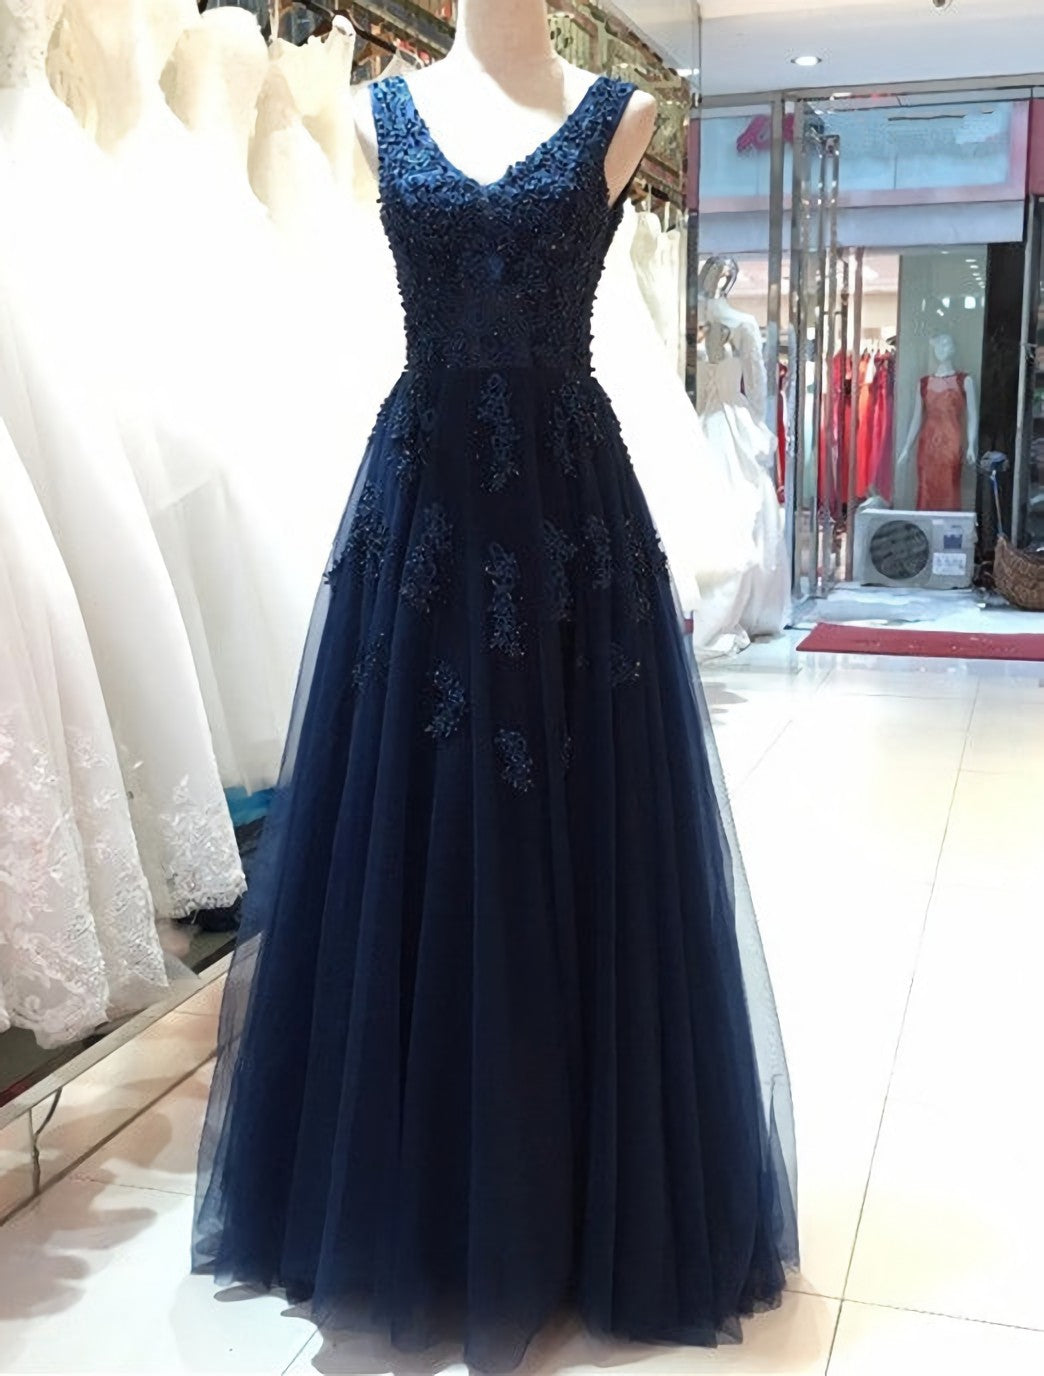 Evening Dresses Prom, Elegant Navy Blue Tulle Backless Floor Length Prom Dresses, Party Gowns Evening Dresses, Navy Blue Formal Dresses